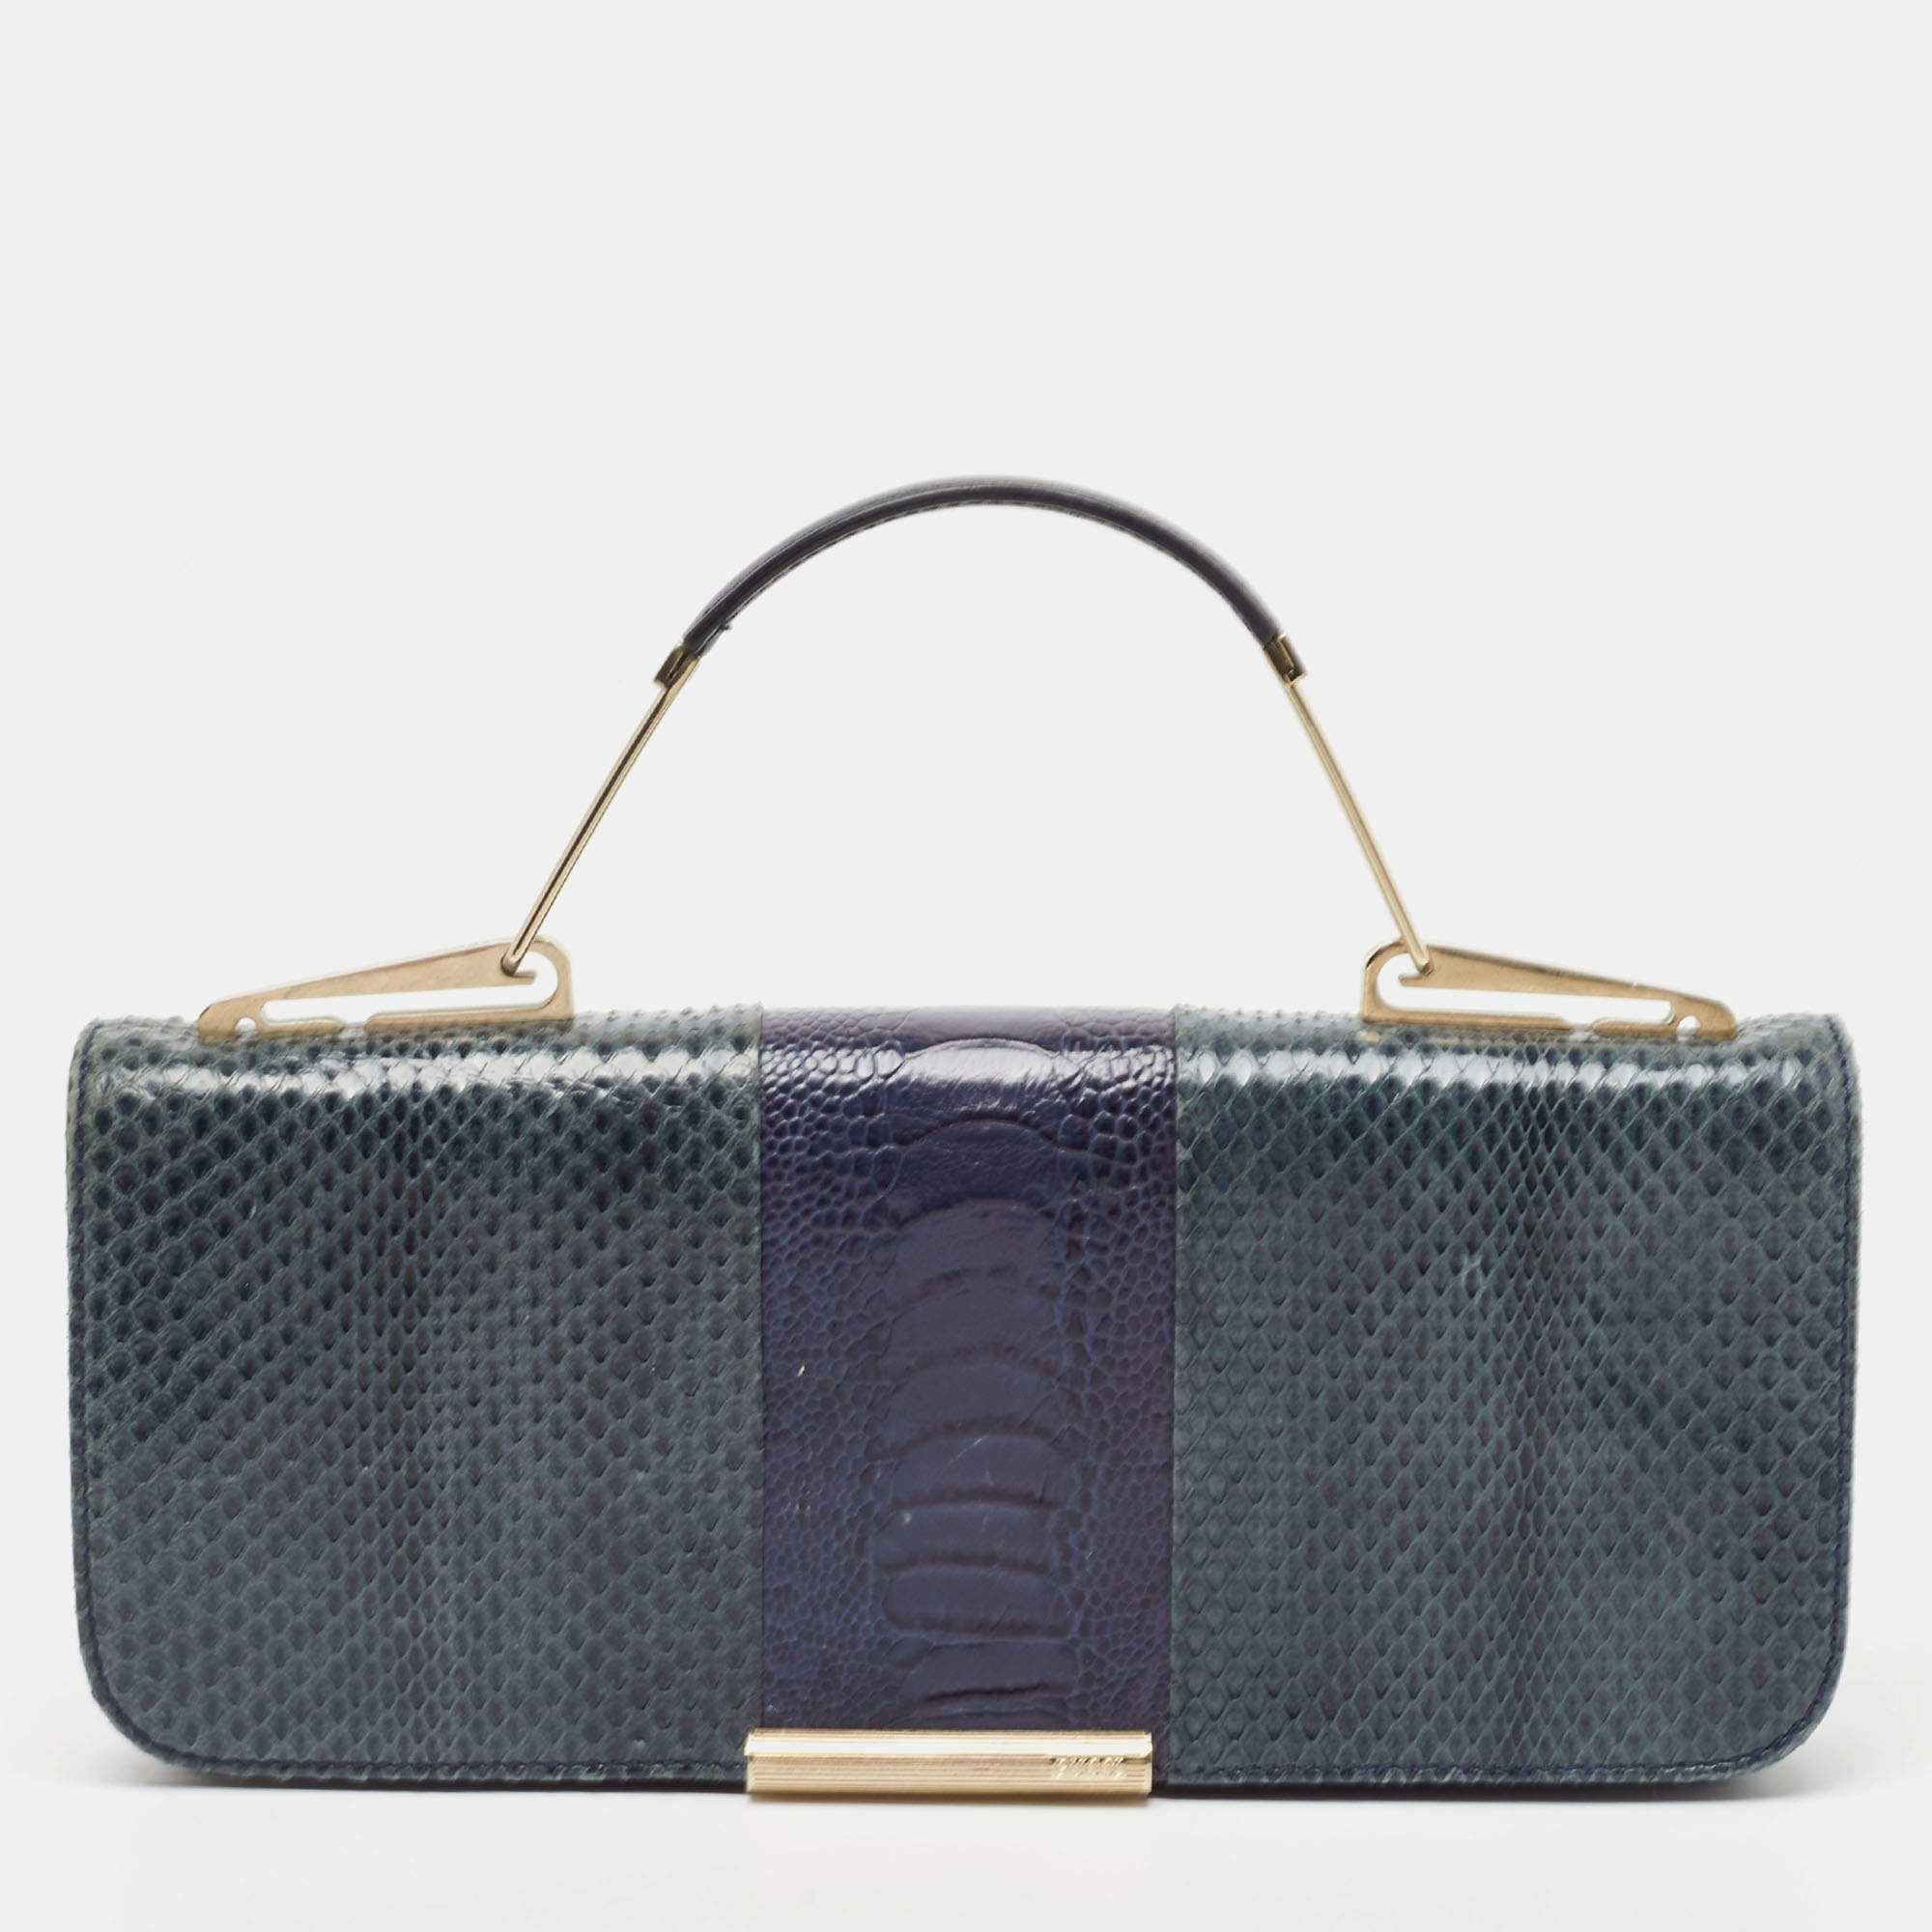 Emilio Pucci Tricolor Snakeskin and Ostrich Embossed Leather Clutch